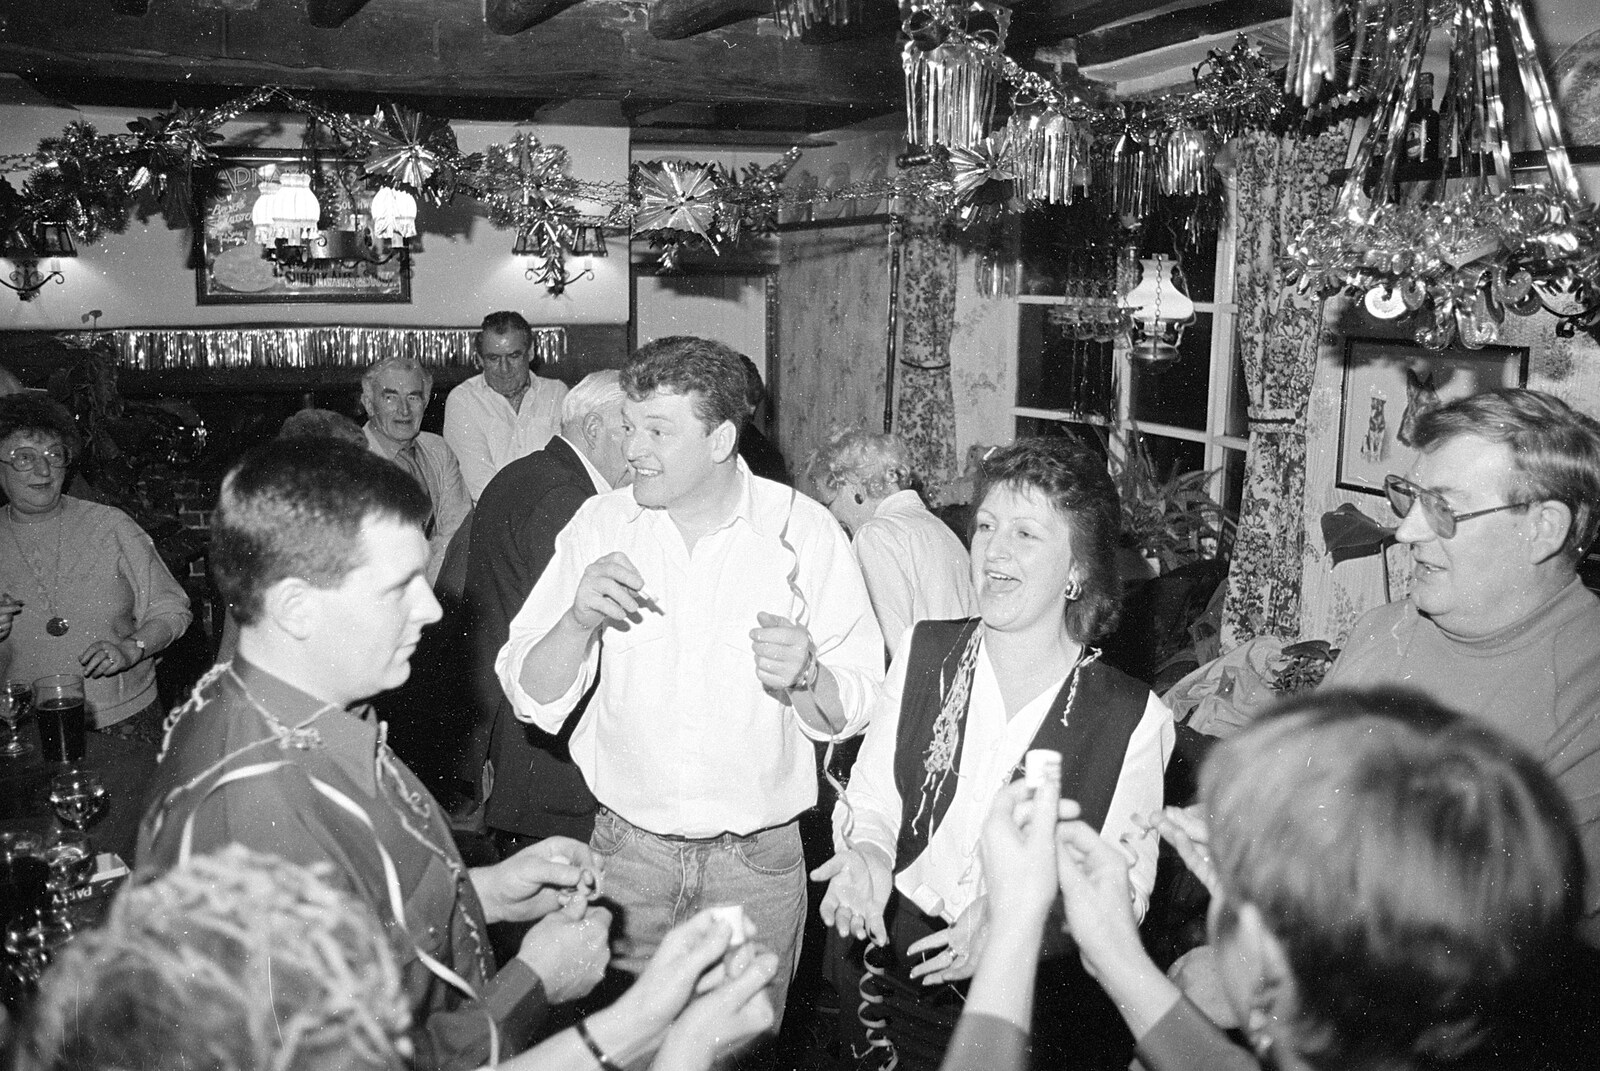 Party poppers are pulled from New Year's Eve at the Swan Inn, Brome, Suffolk - 31st December 1992